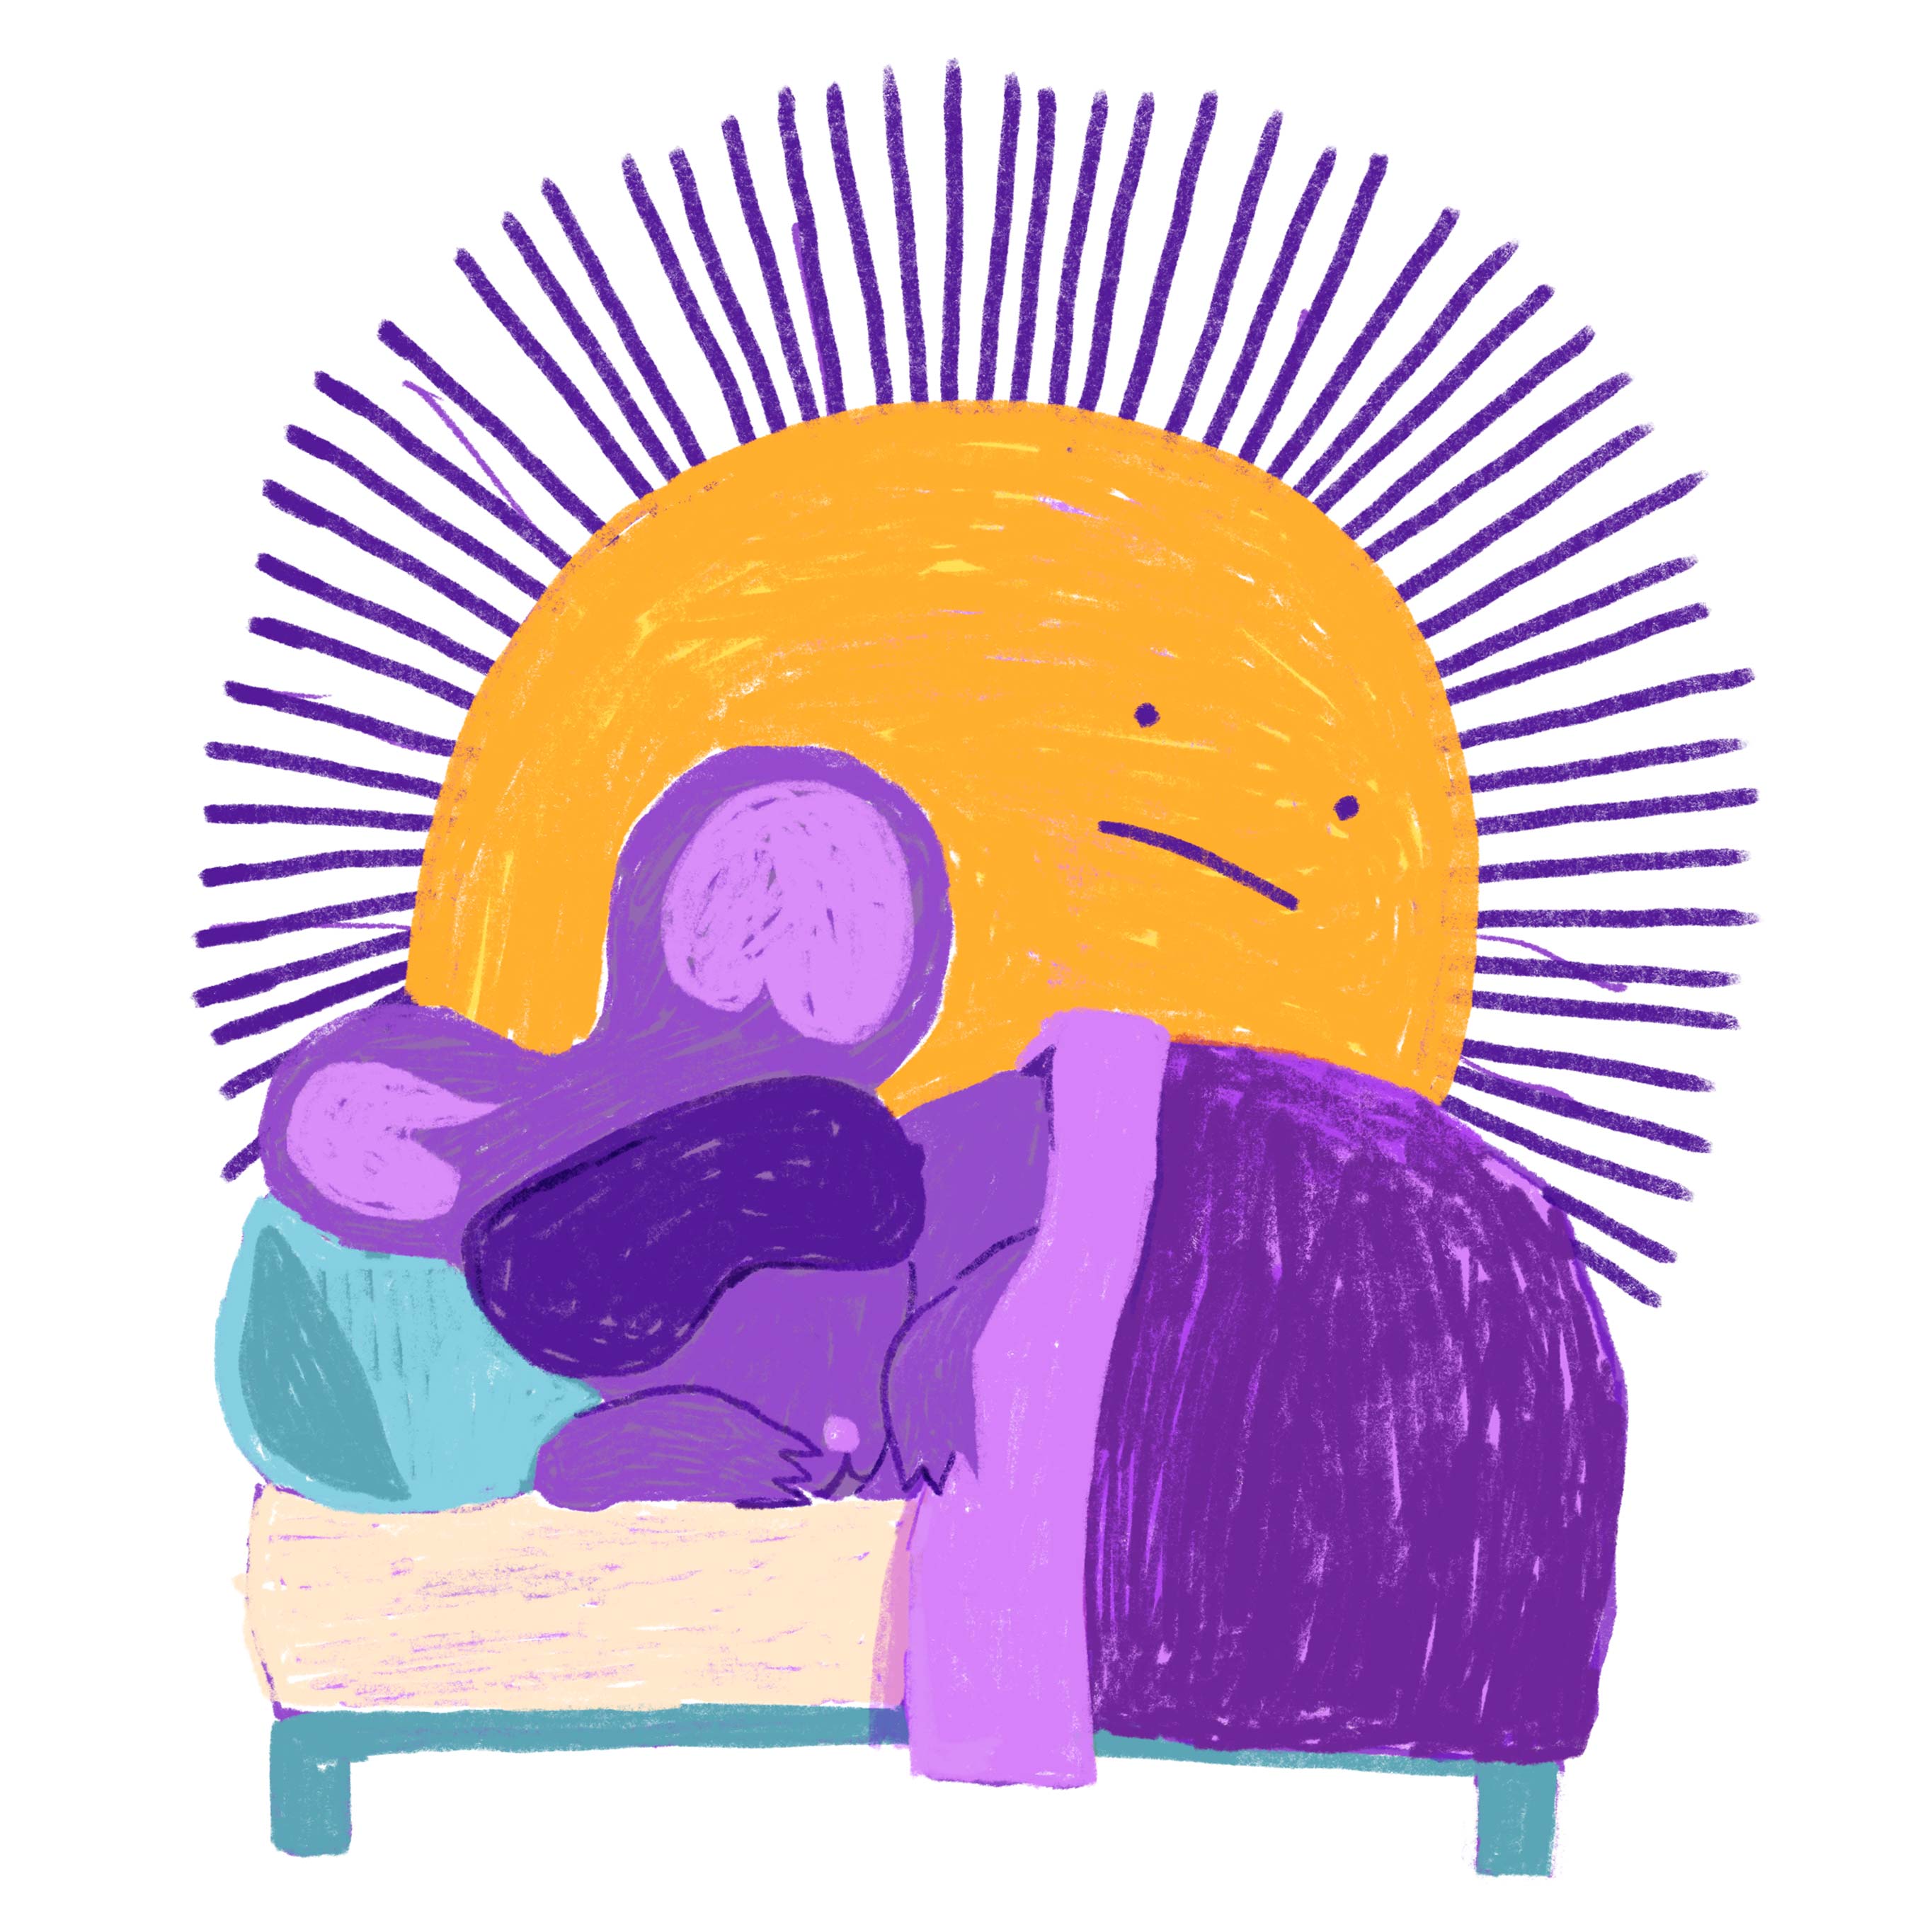 A purple rat sleeps with an eye mask on while the sun rises.